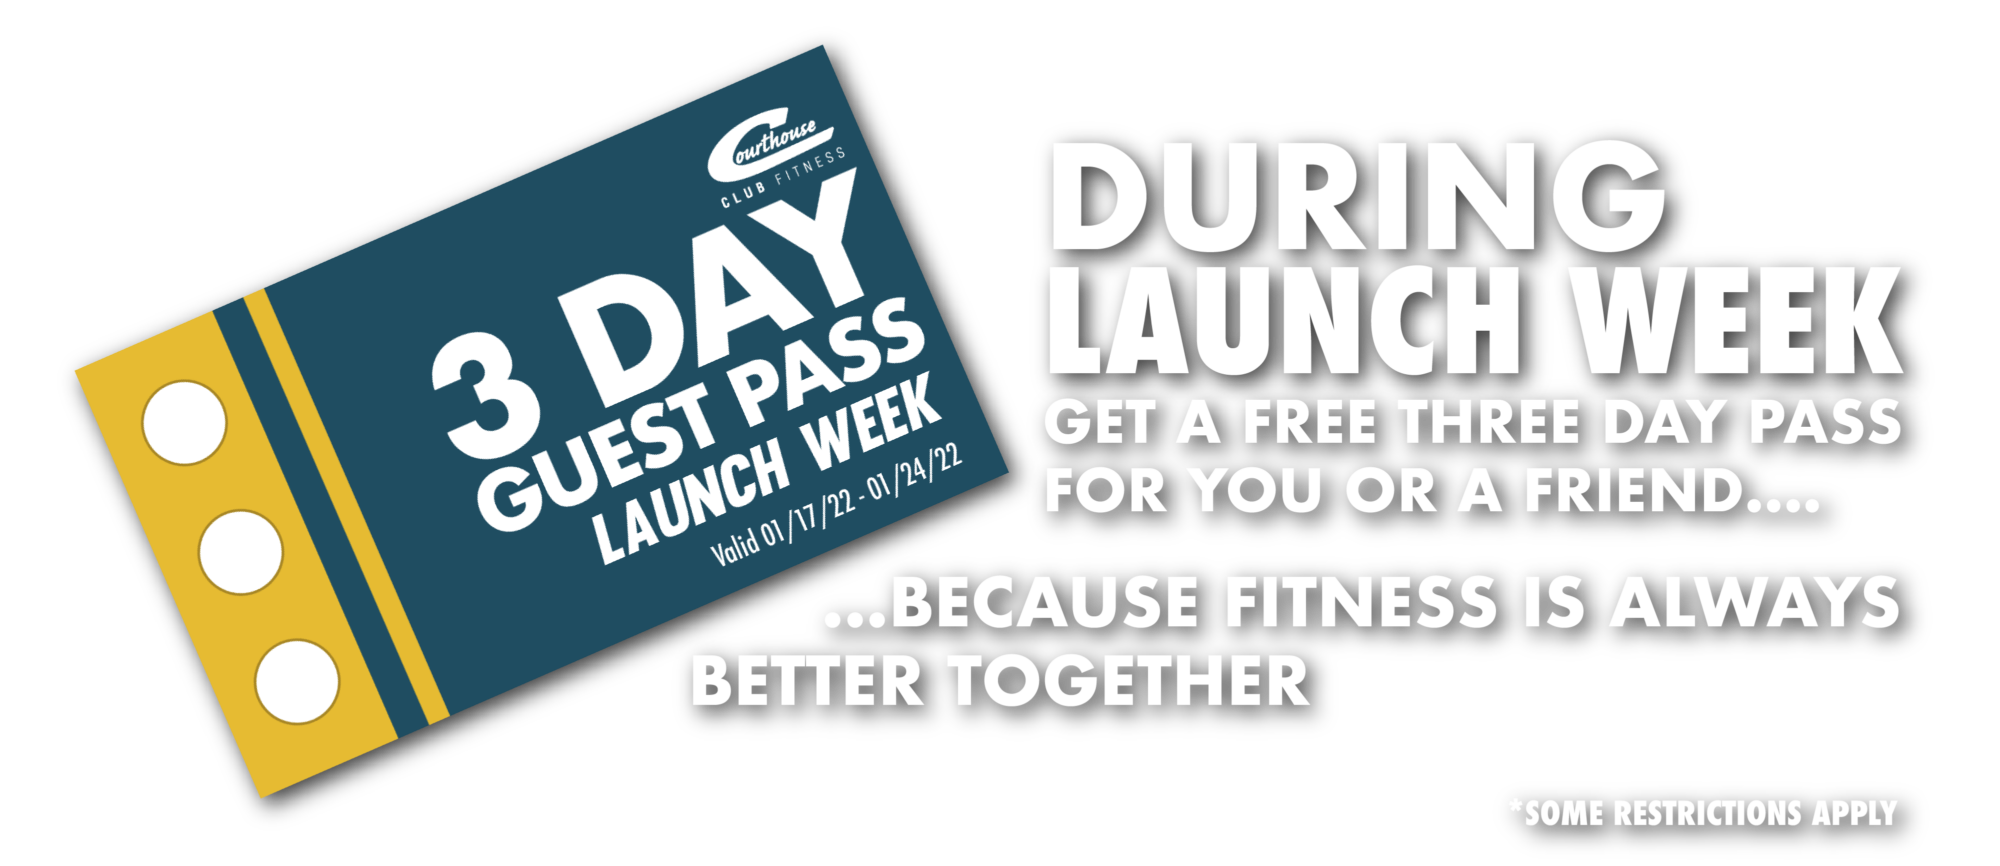 During Launch Week GET A FREE THREE DAY PASS FOR YOU OR A FRIEND BECAUSE FITNESS IS ALWAYS BETTER TOGETHER